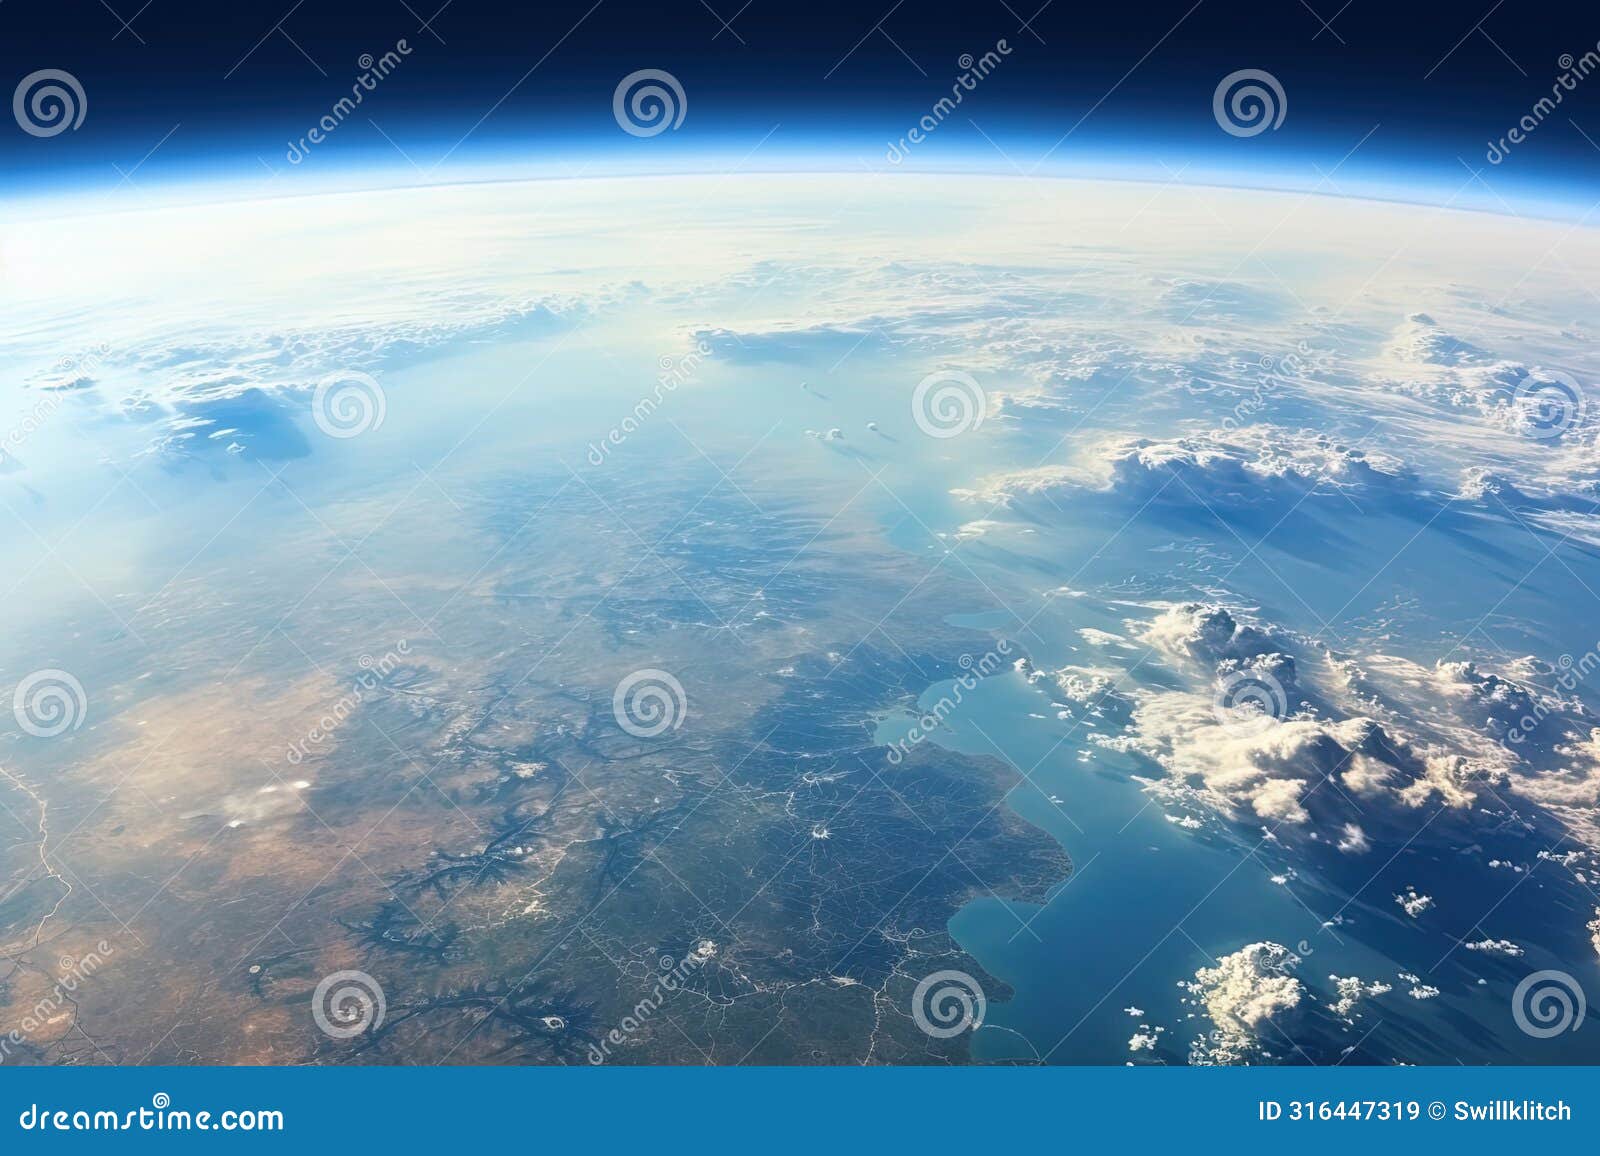 earth horizon view from space. satellite or plane view of the planet from stratosphere.